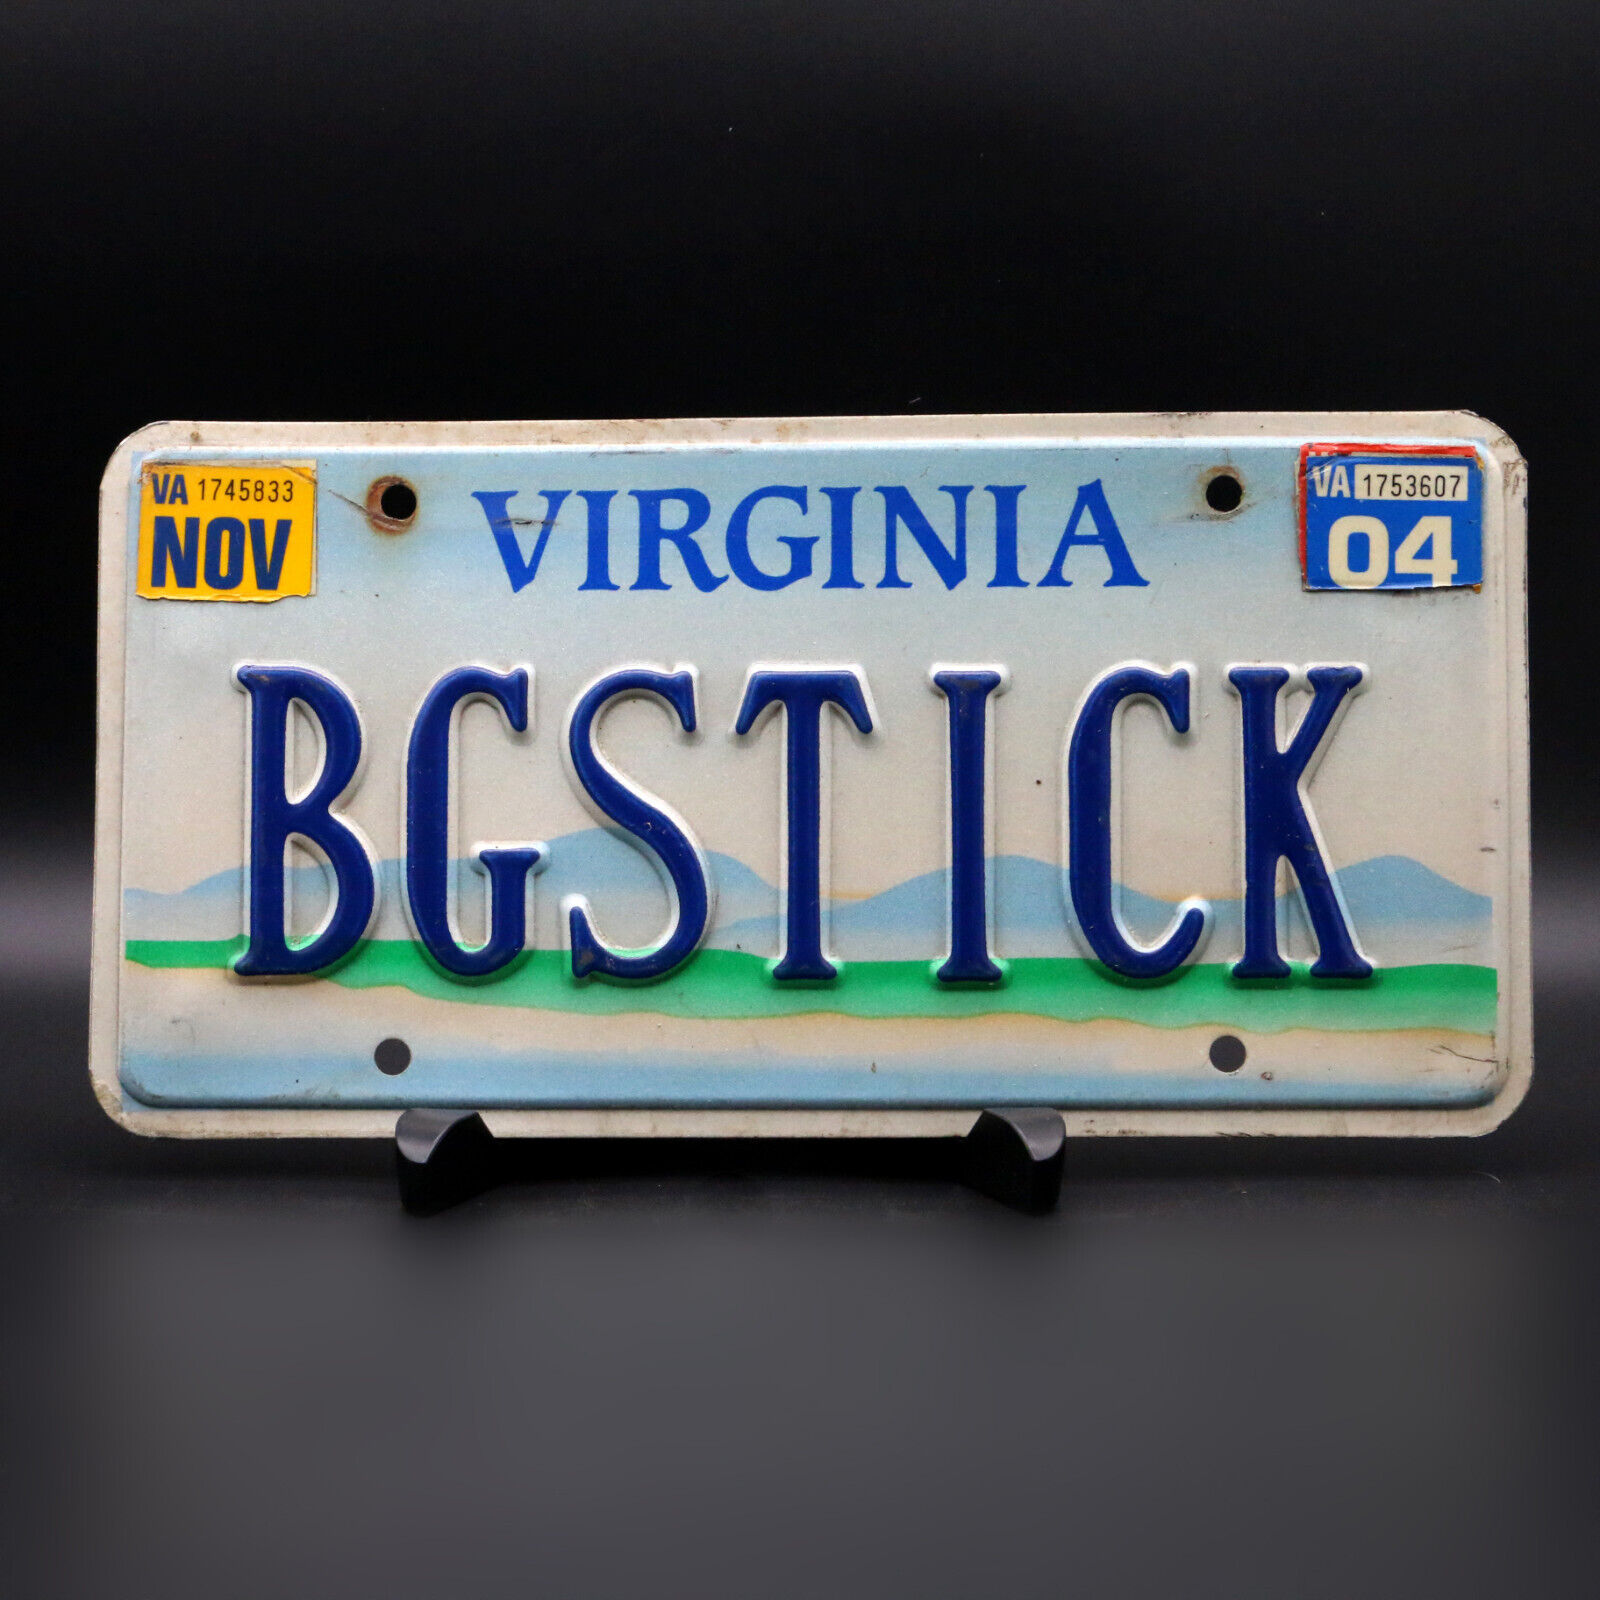 2004 Virginia BGSTICK Personalized License Plate Expired Car Tag Mountain Scene